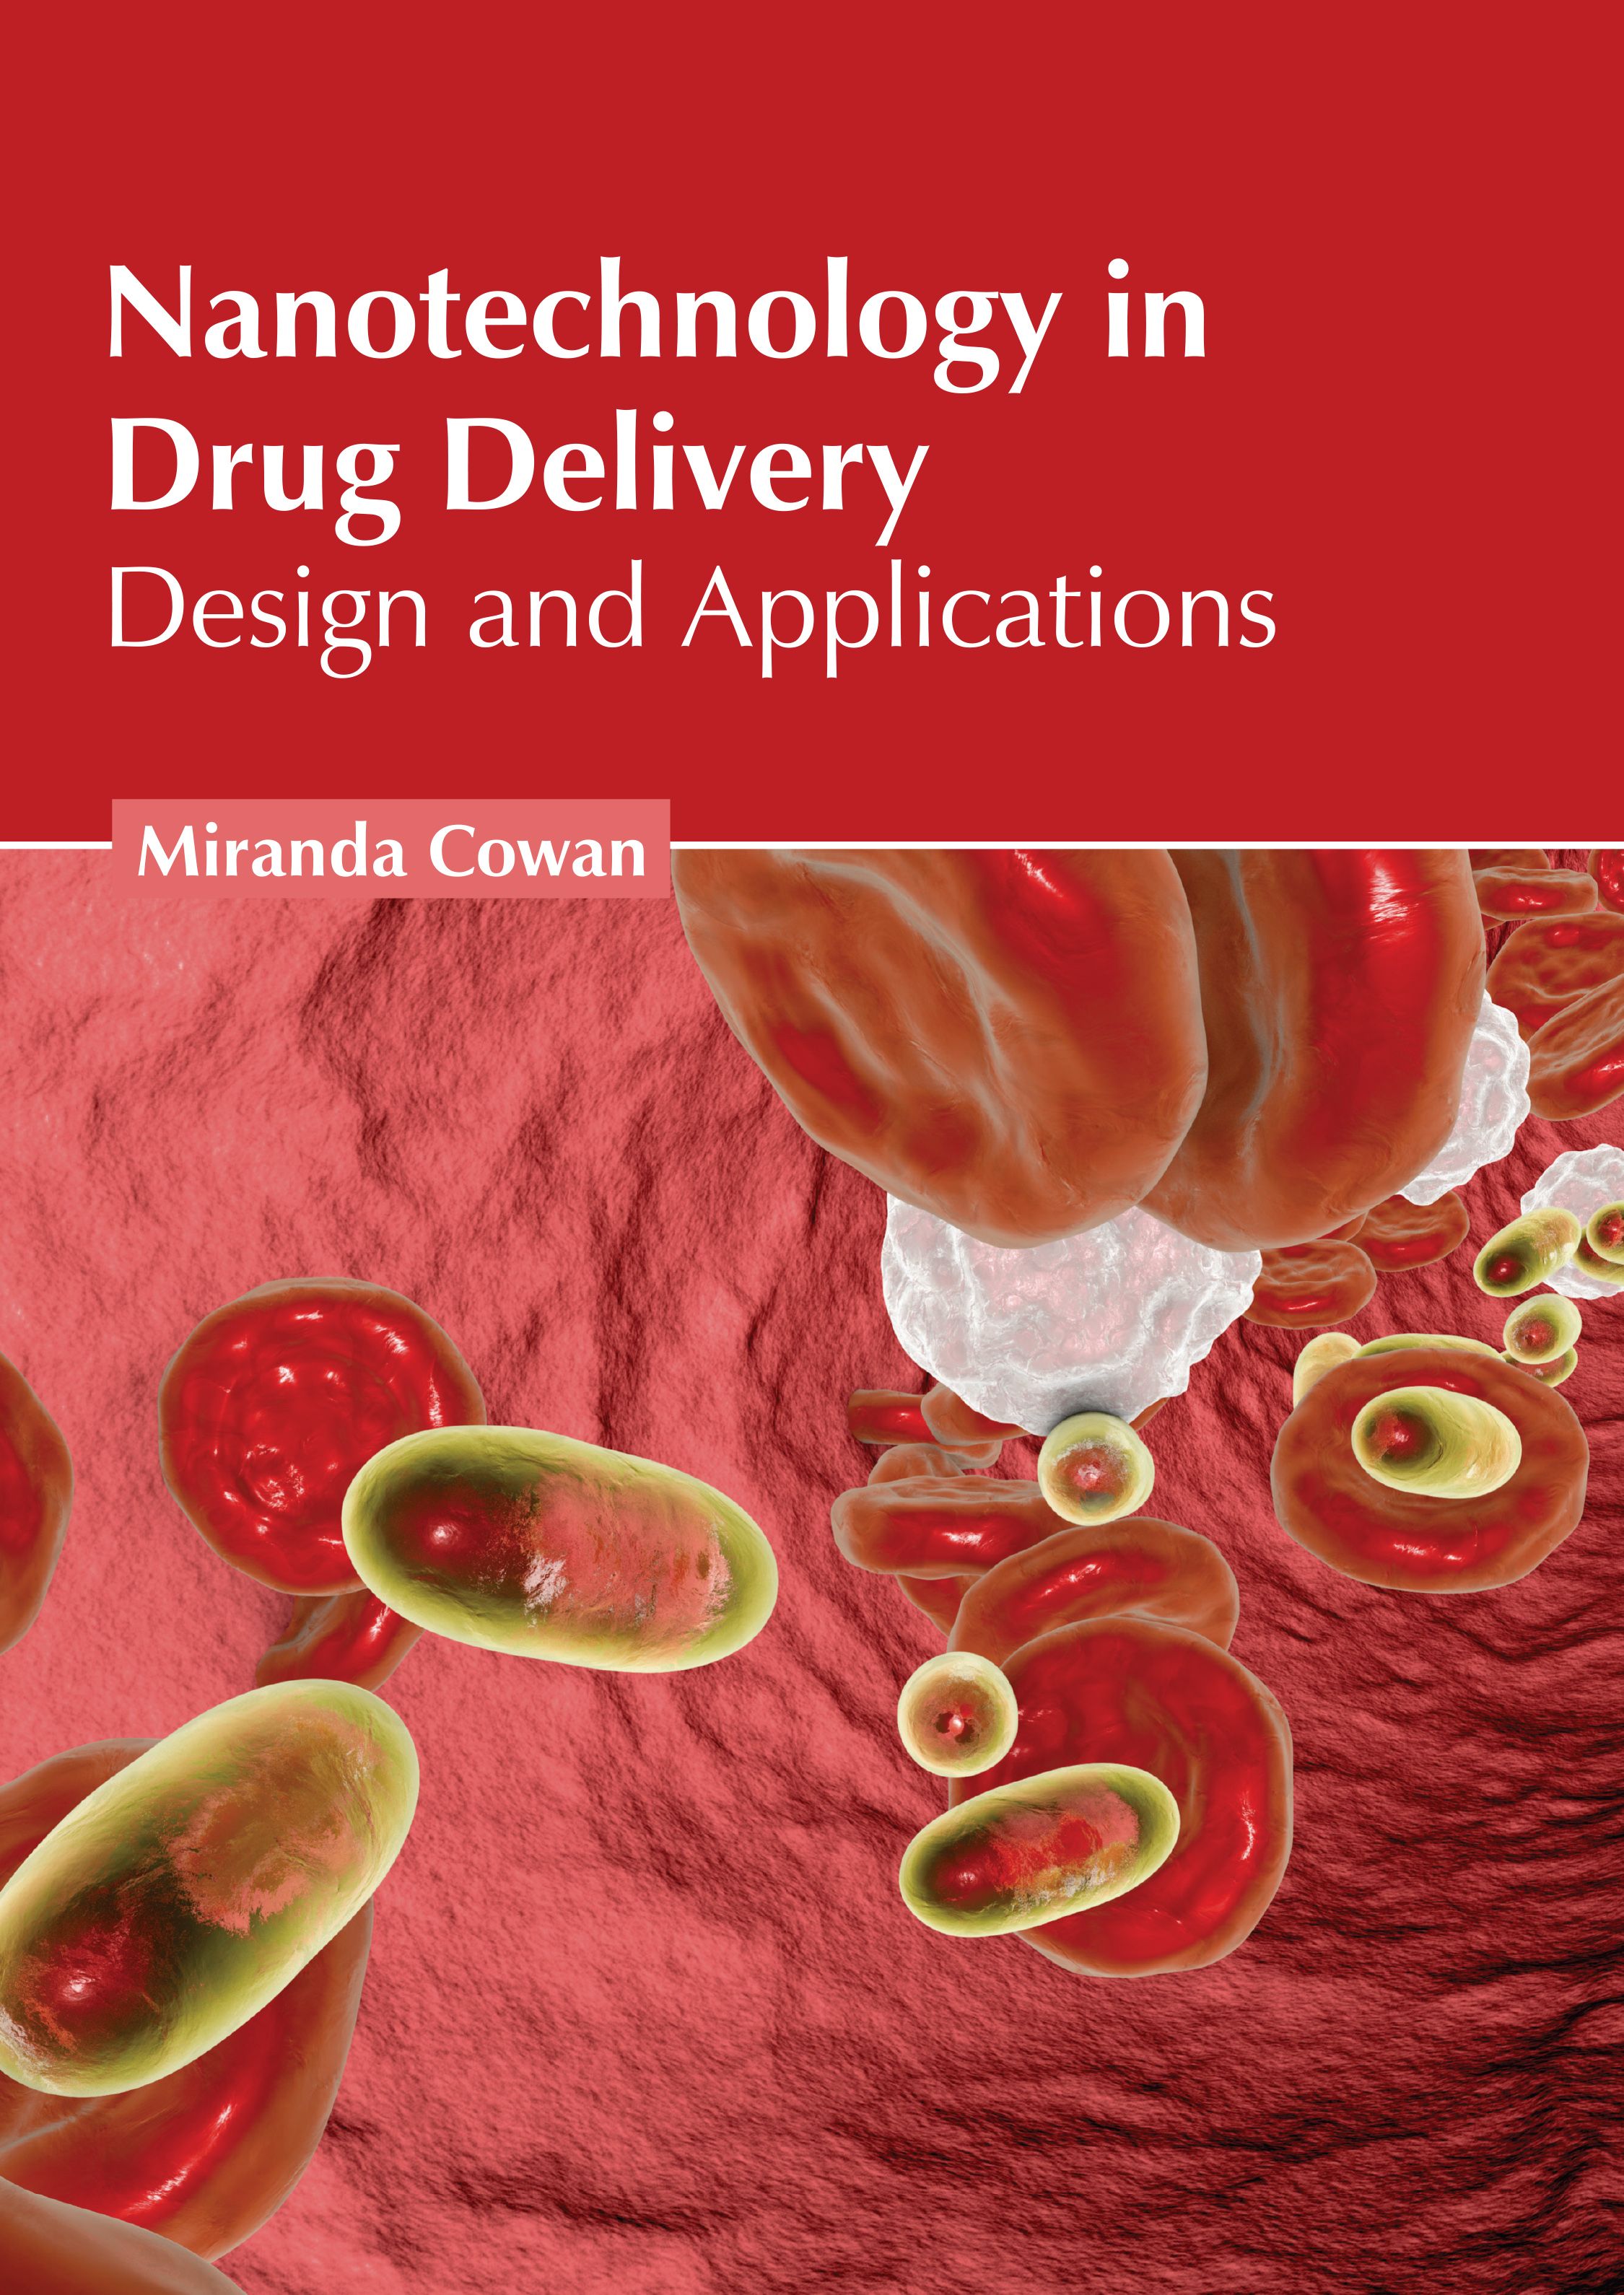 exclusive-publishers/american-medical-publishers/nanotechnology-in-drug-delivery-design-and-applications-9798887402925